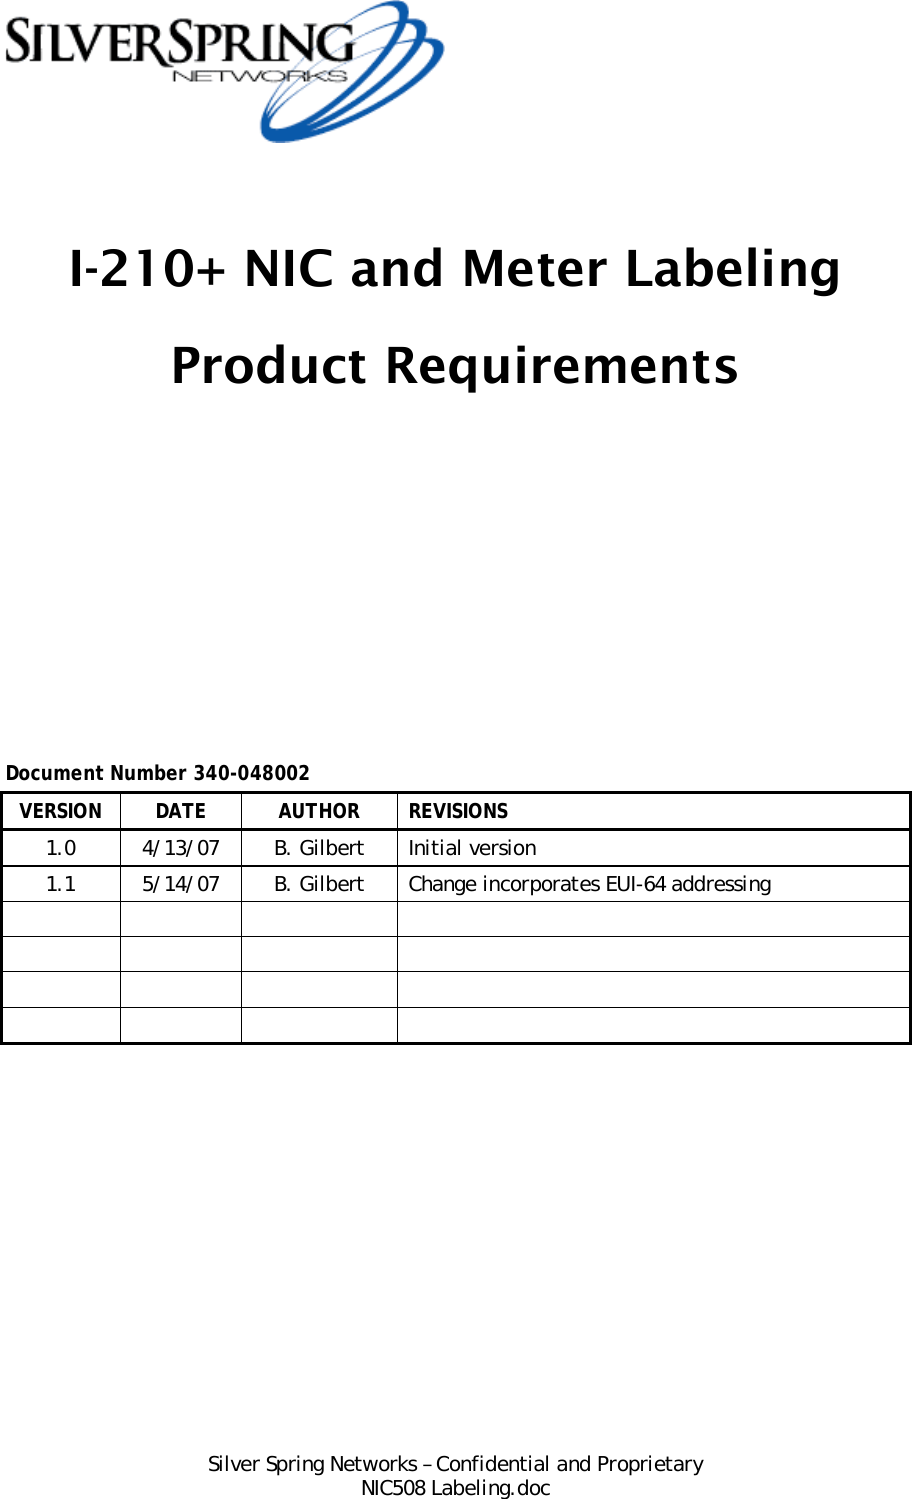  Silver Spring Networks – Confidential and Proprietary NIC508 Labeling.doc  I-210+ NIC and Meter Labeling Product Requirements                Document Number 340-048002 VERSION DATE  AUTHOR REVISIONS 1.0  4/13/07  B. Gilbert  Initial version 1.1  5/14/07  B. Gilbert  Change incorporates EUI-64 addressing                      